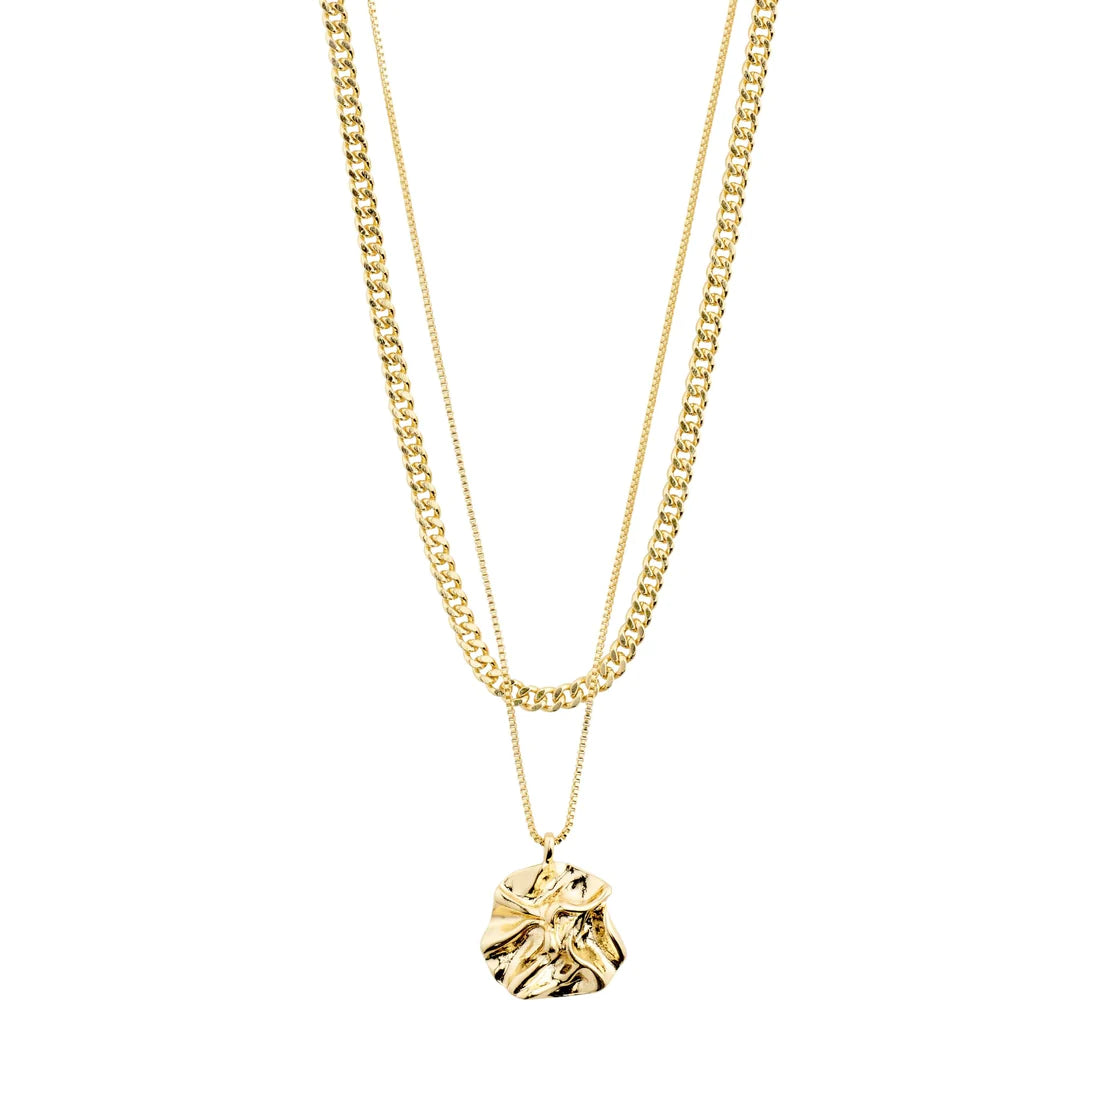 Gold 2-in-1 necklace with circular pendant